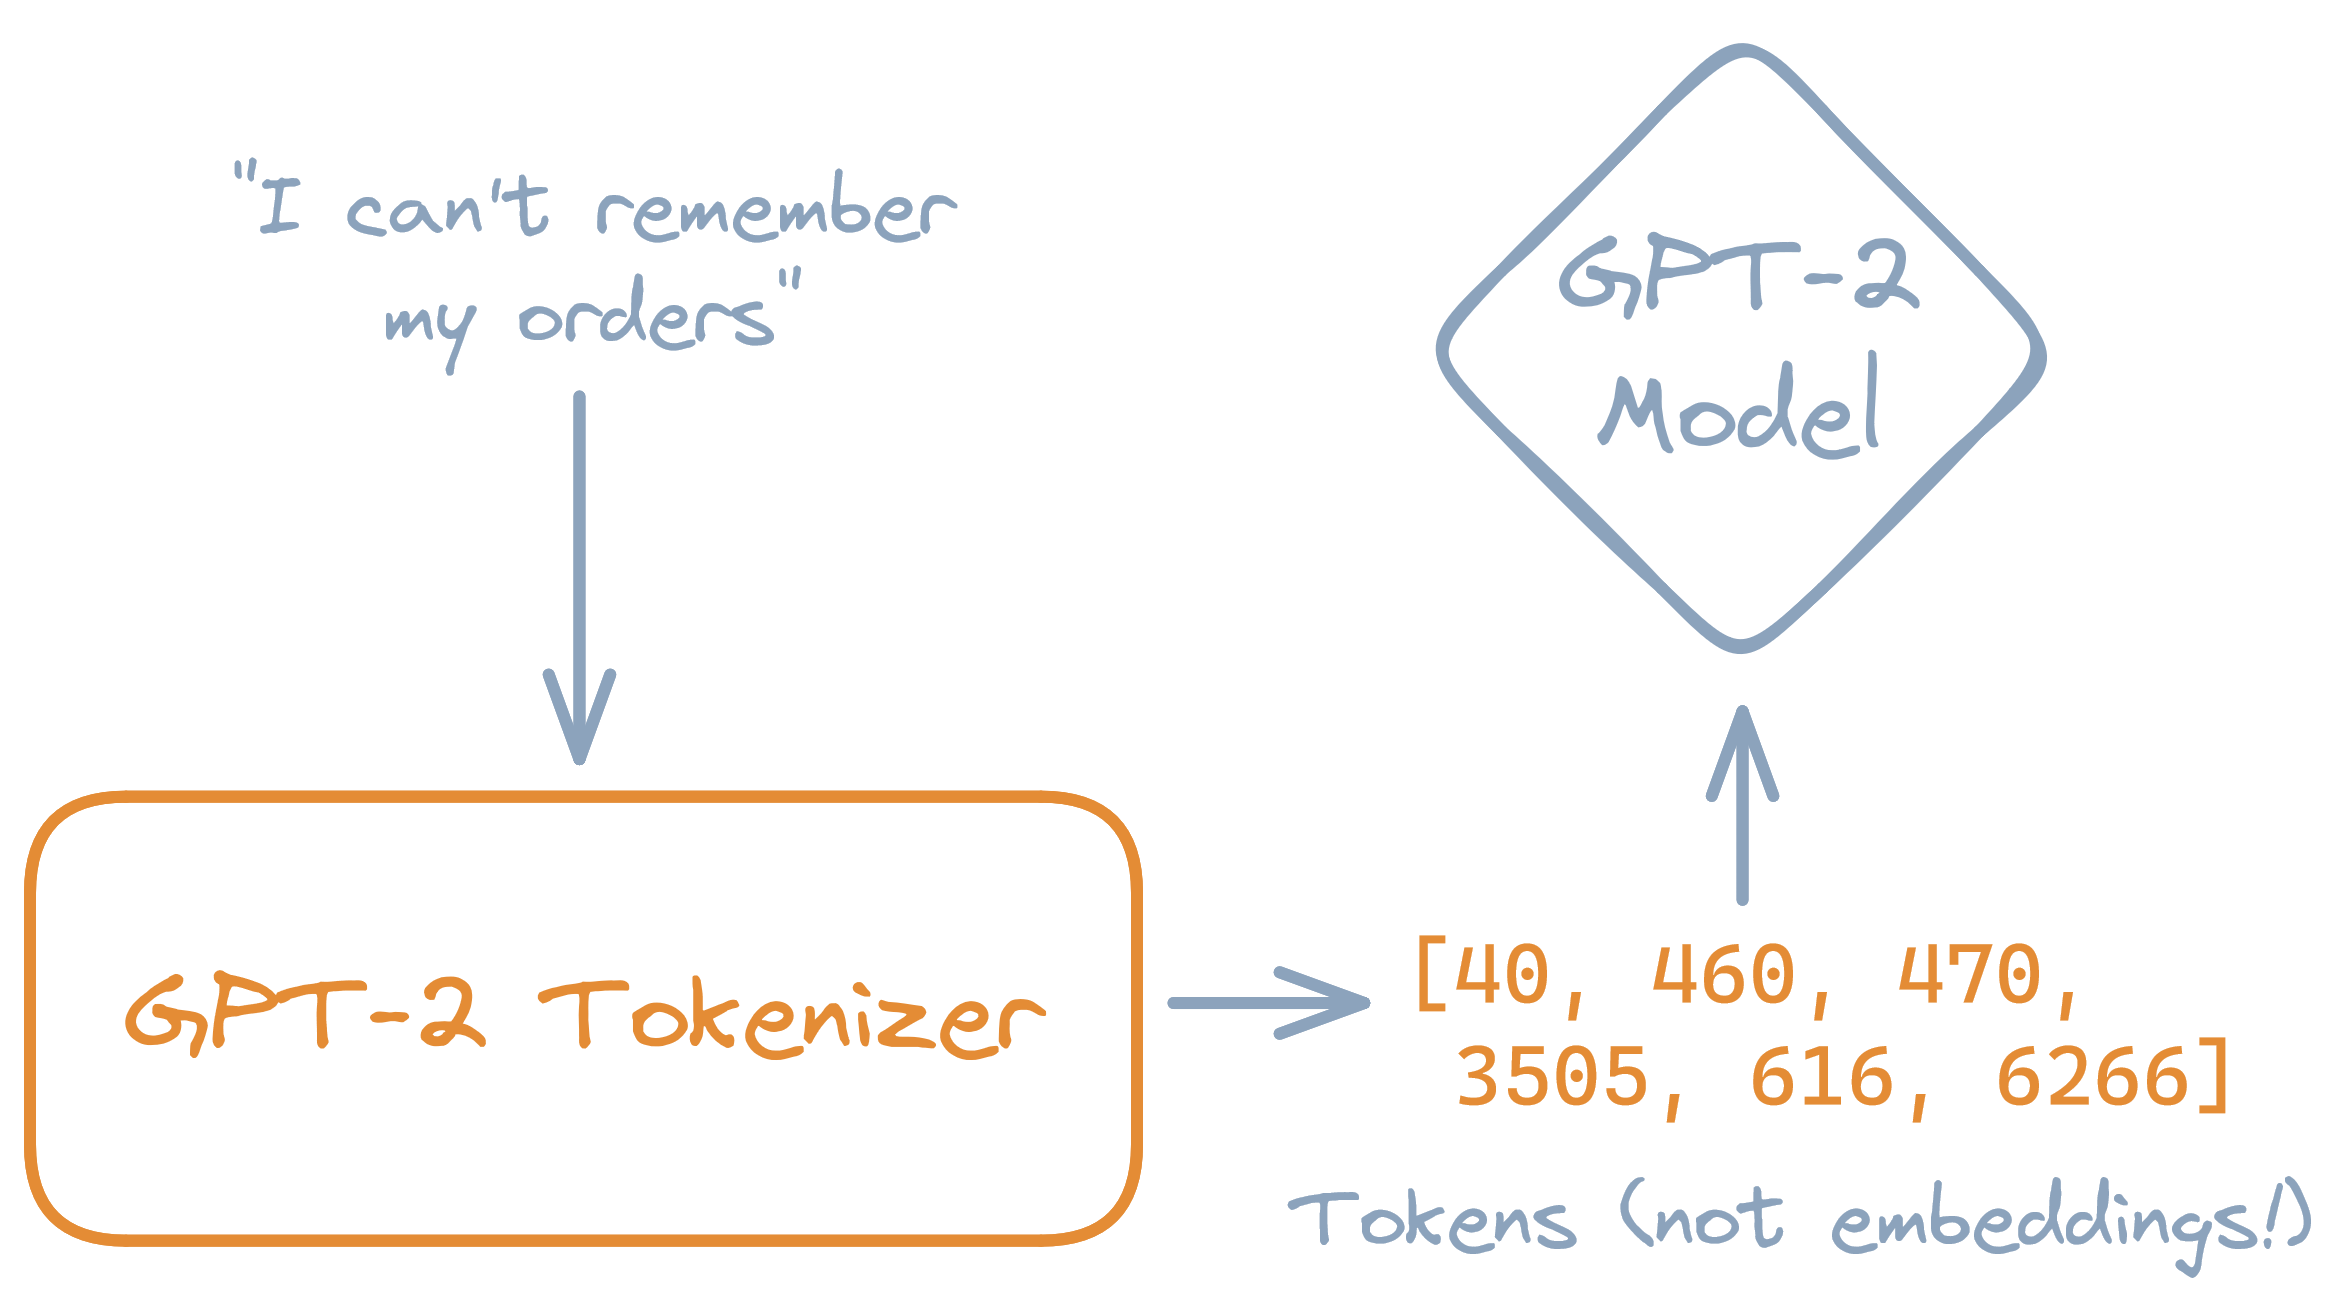 Diagram showing the preprocessing step of "tokenizing" text before running the GPT-2 model